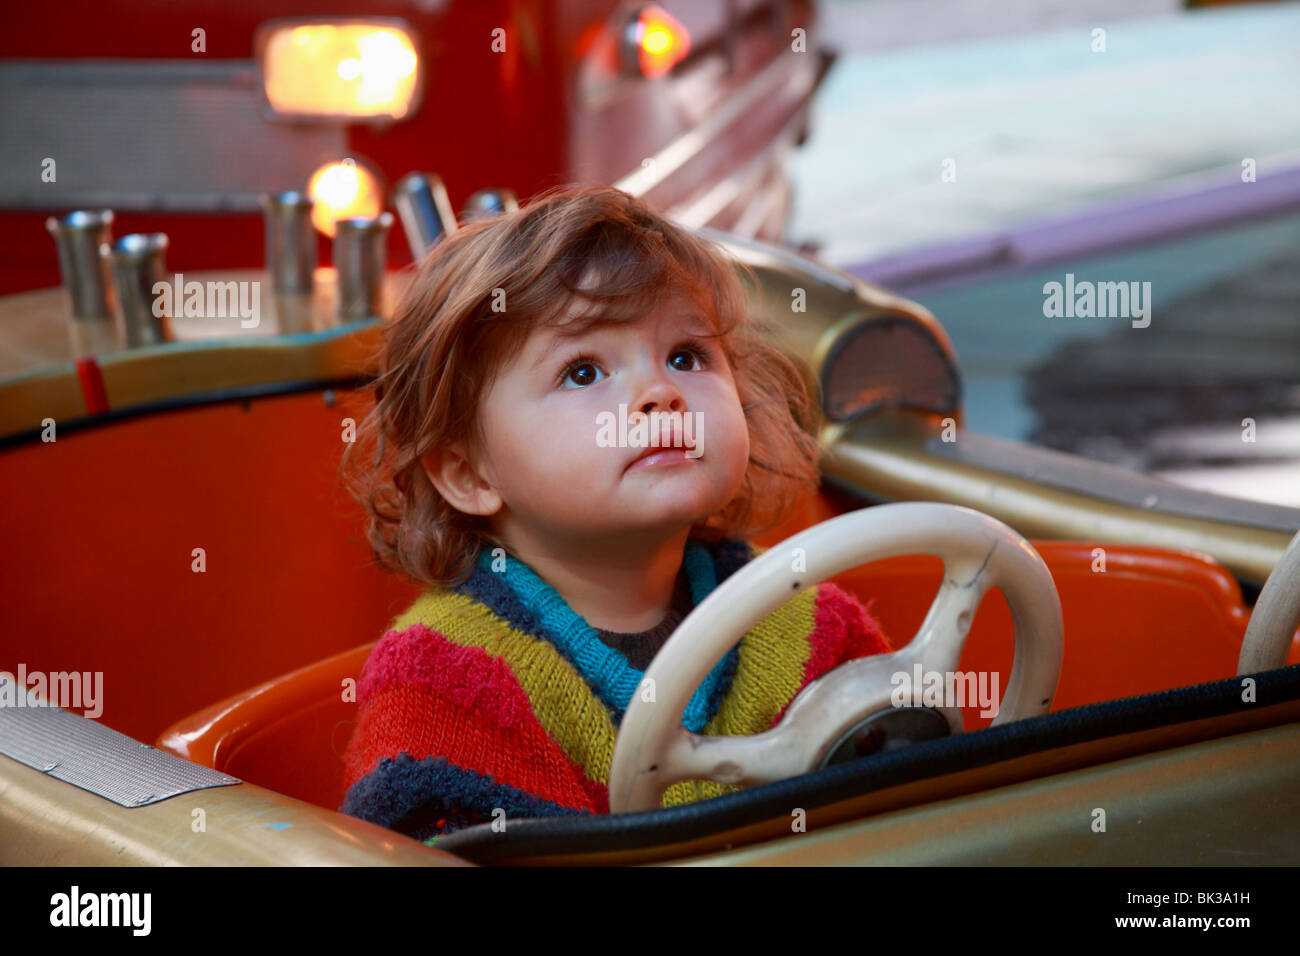 22 months old girl inside a fire car merry-go-round in motion Stock Photo